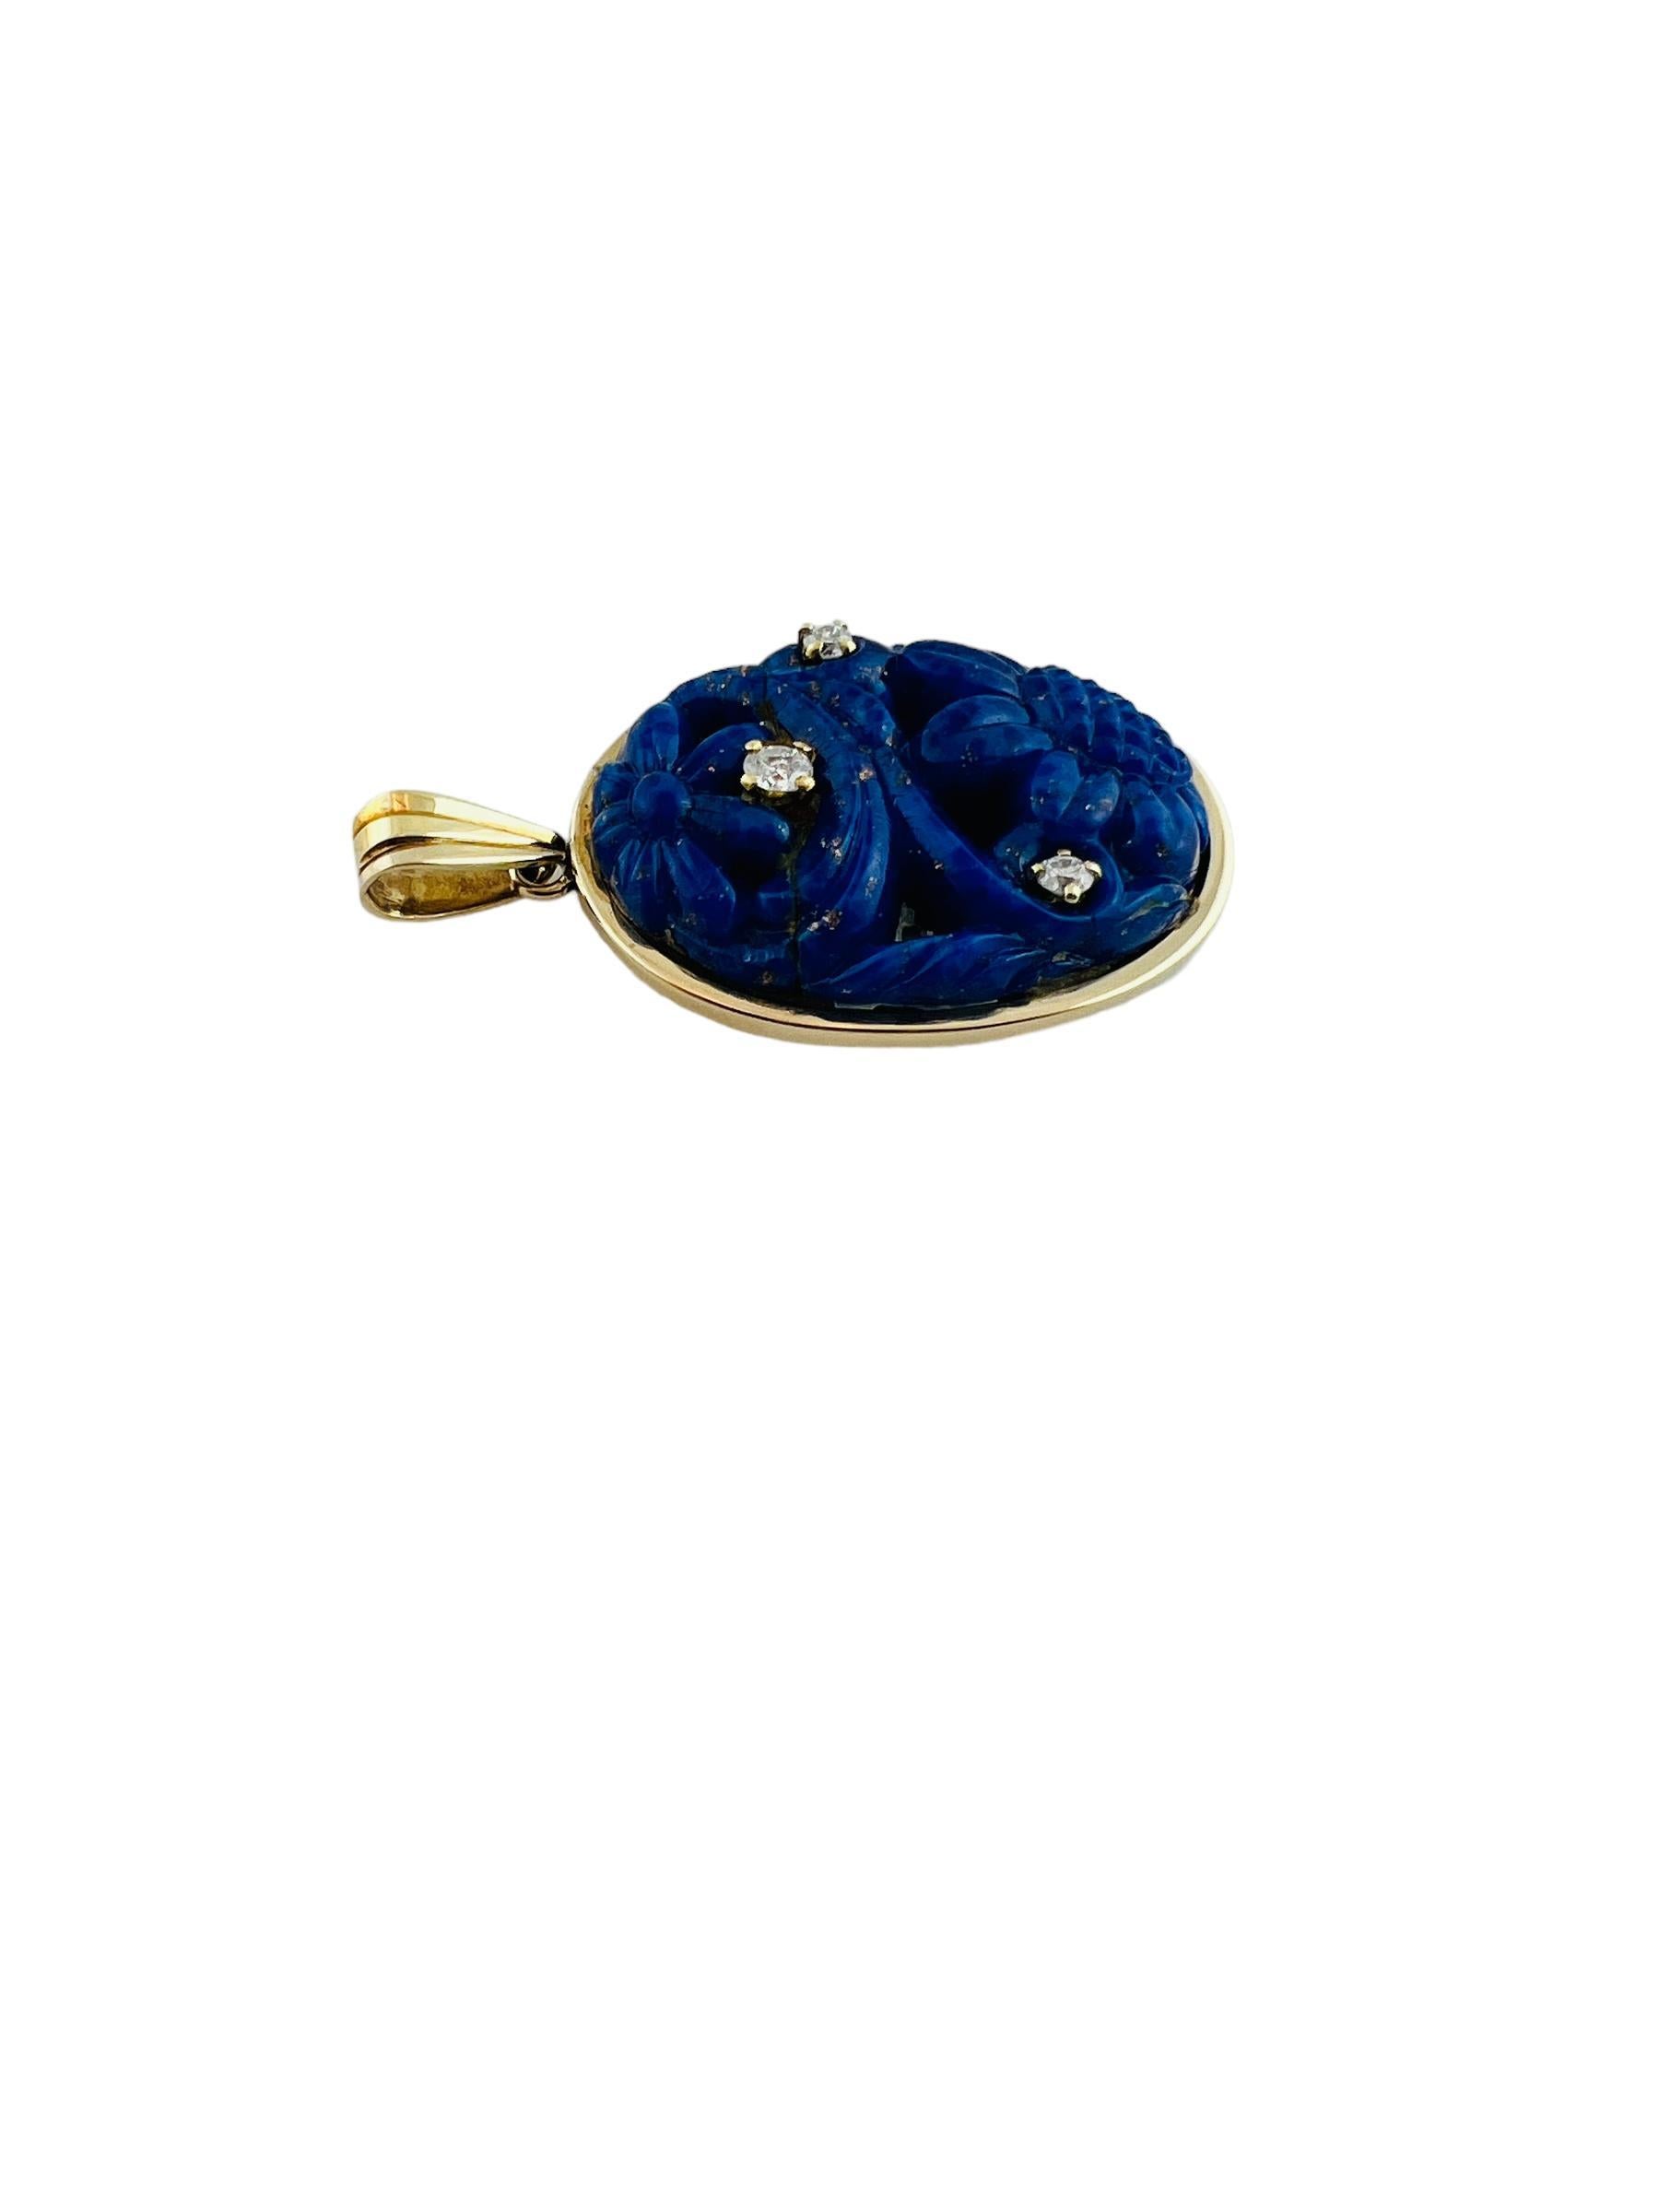 Antique 14K Yellow Gold Carved Lapis Lazuli and Diamond Pendant #15999 In Good Condition For Sale In Washington Depot, CT